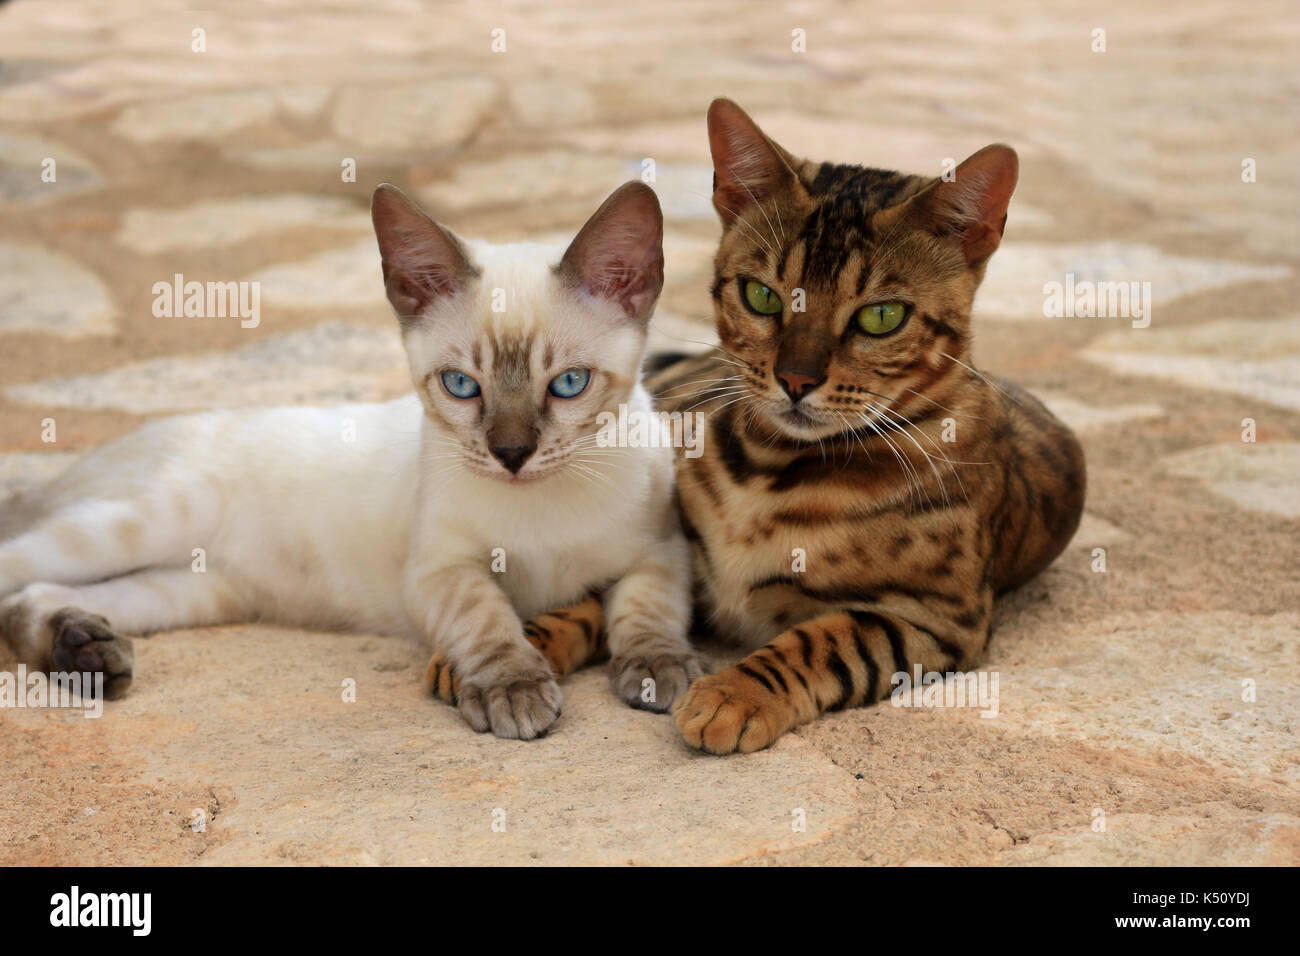 Snowbengal (seal lynx point spotted tabby) e bengala (black spotted tabby) sono poste vicine tra di loro Foto Stock